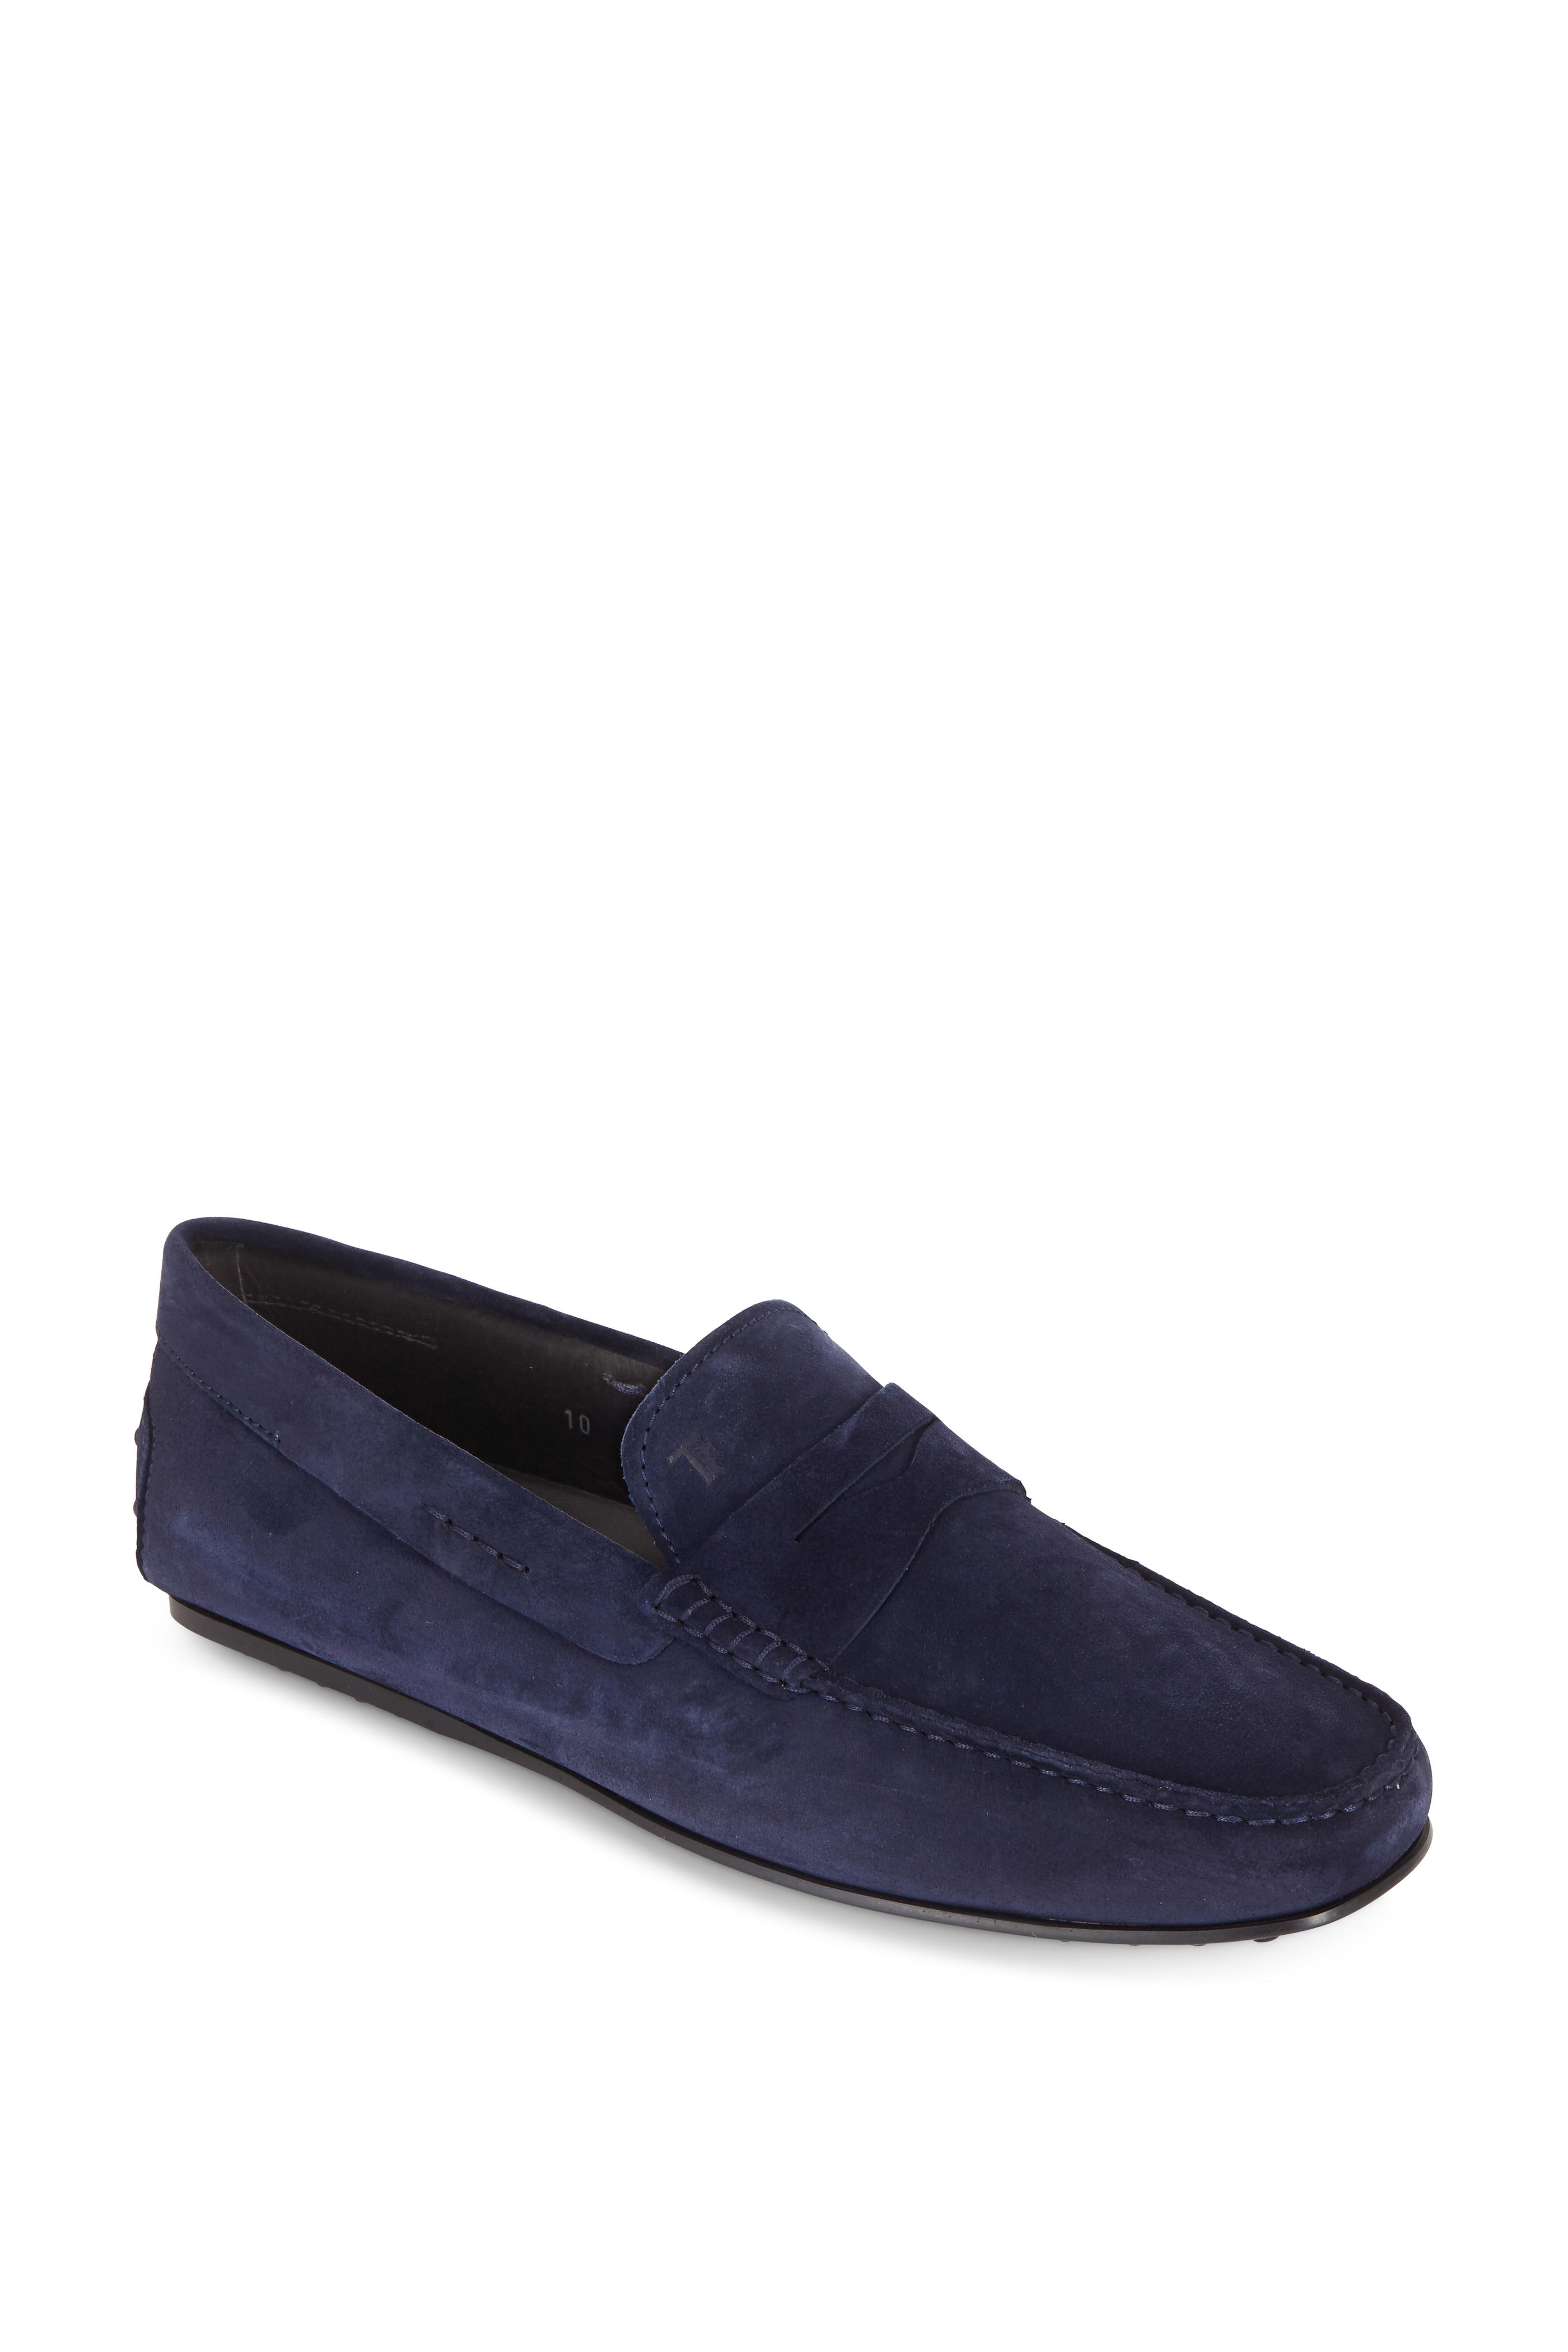 mens blue suede penny loafers